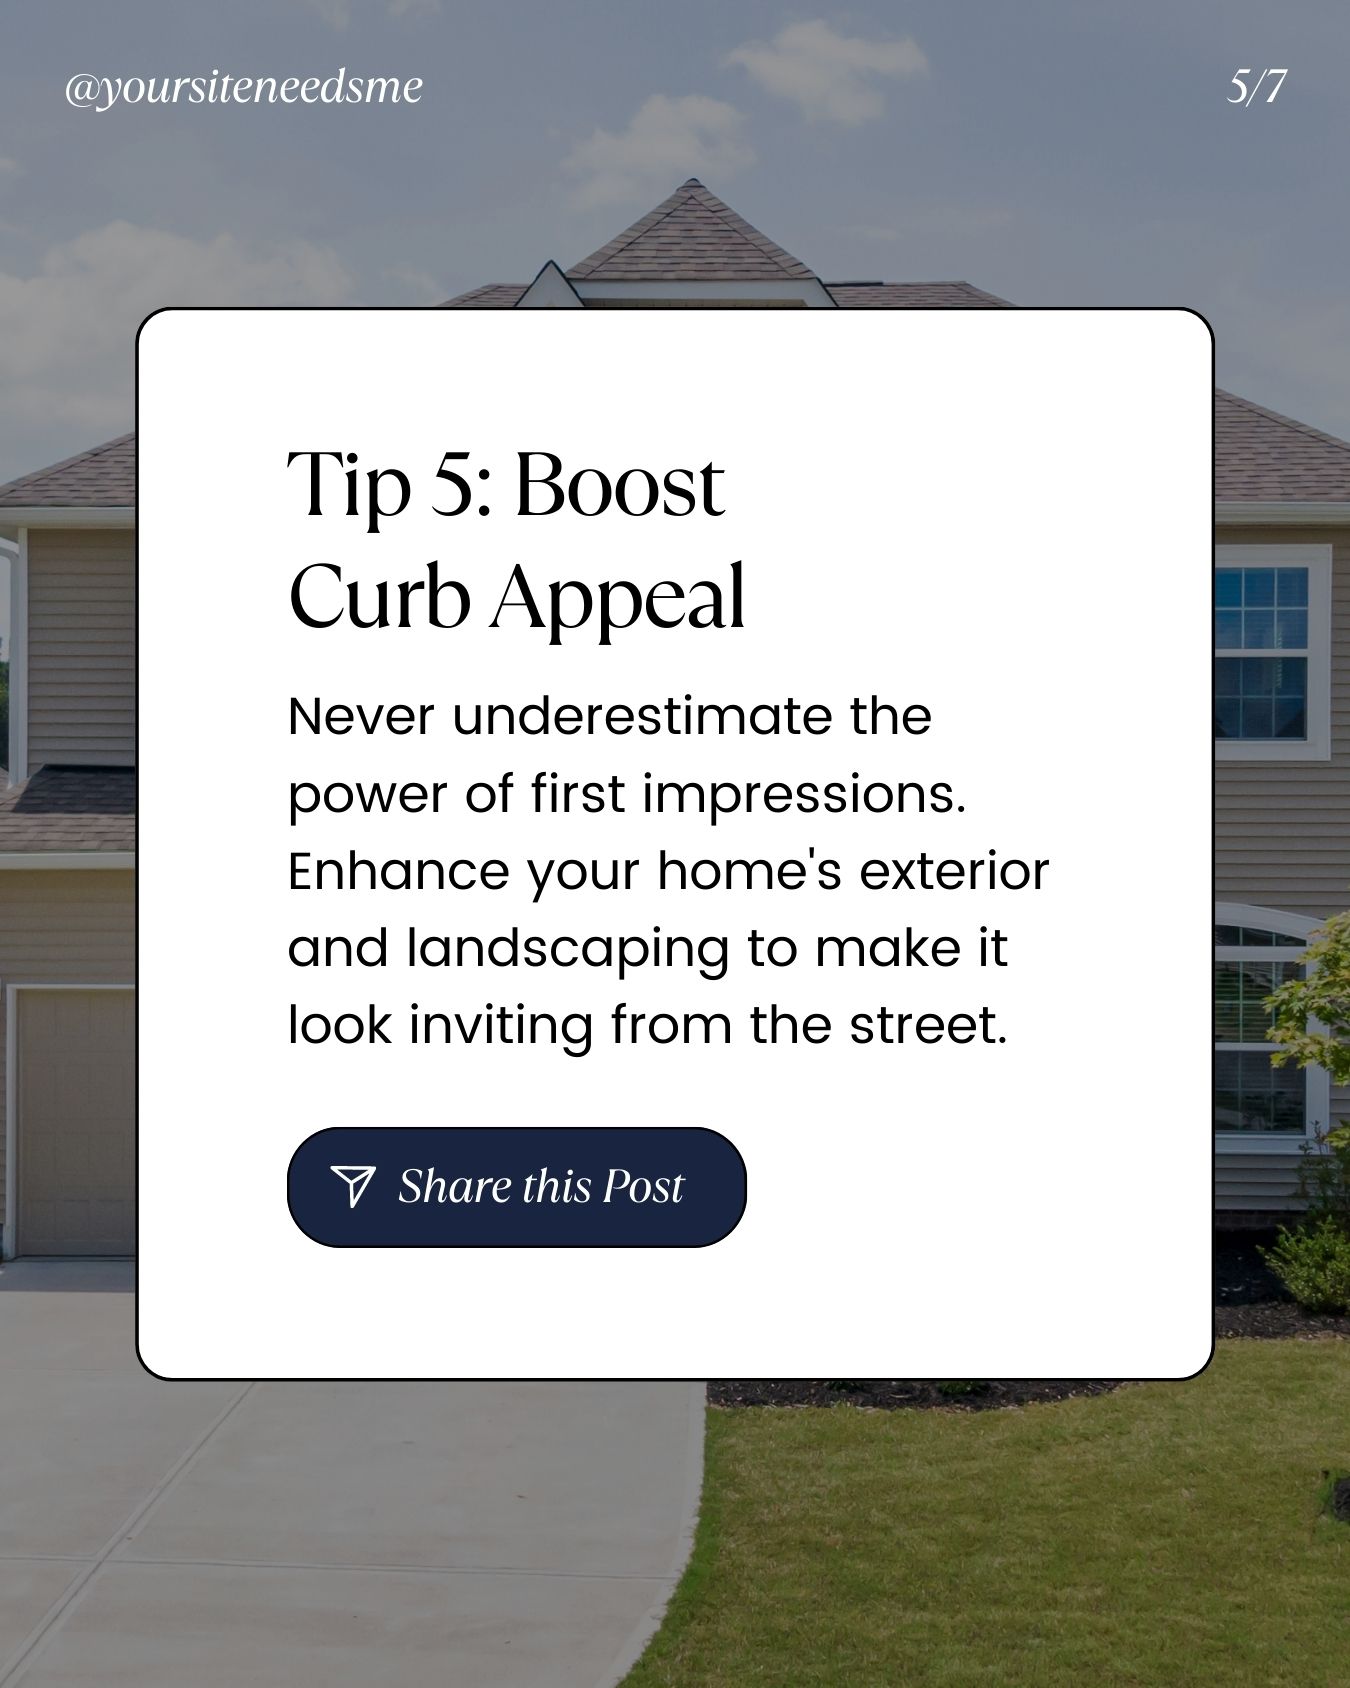 Tips to Sell Your Home 5 Boost Curb Appeal